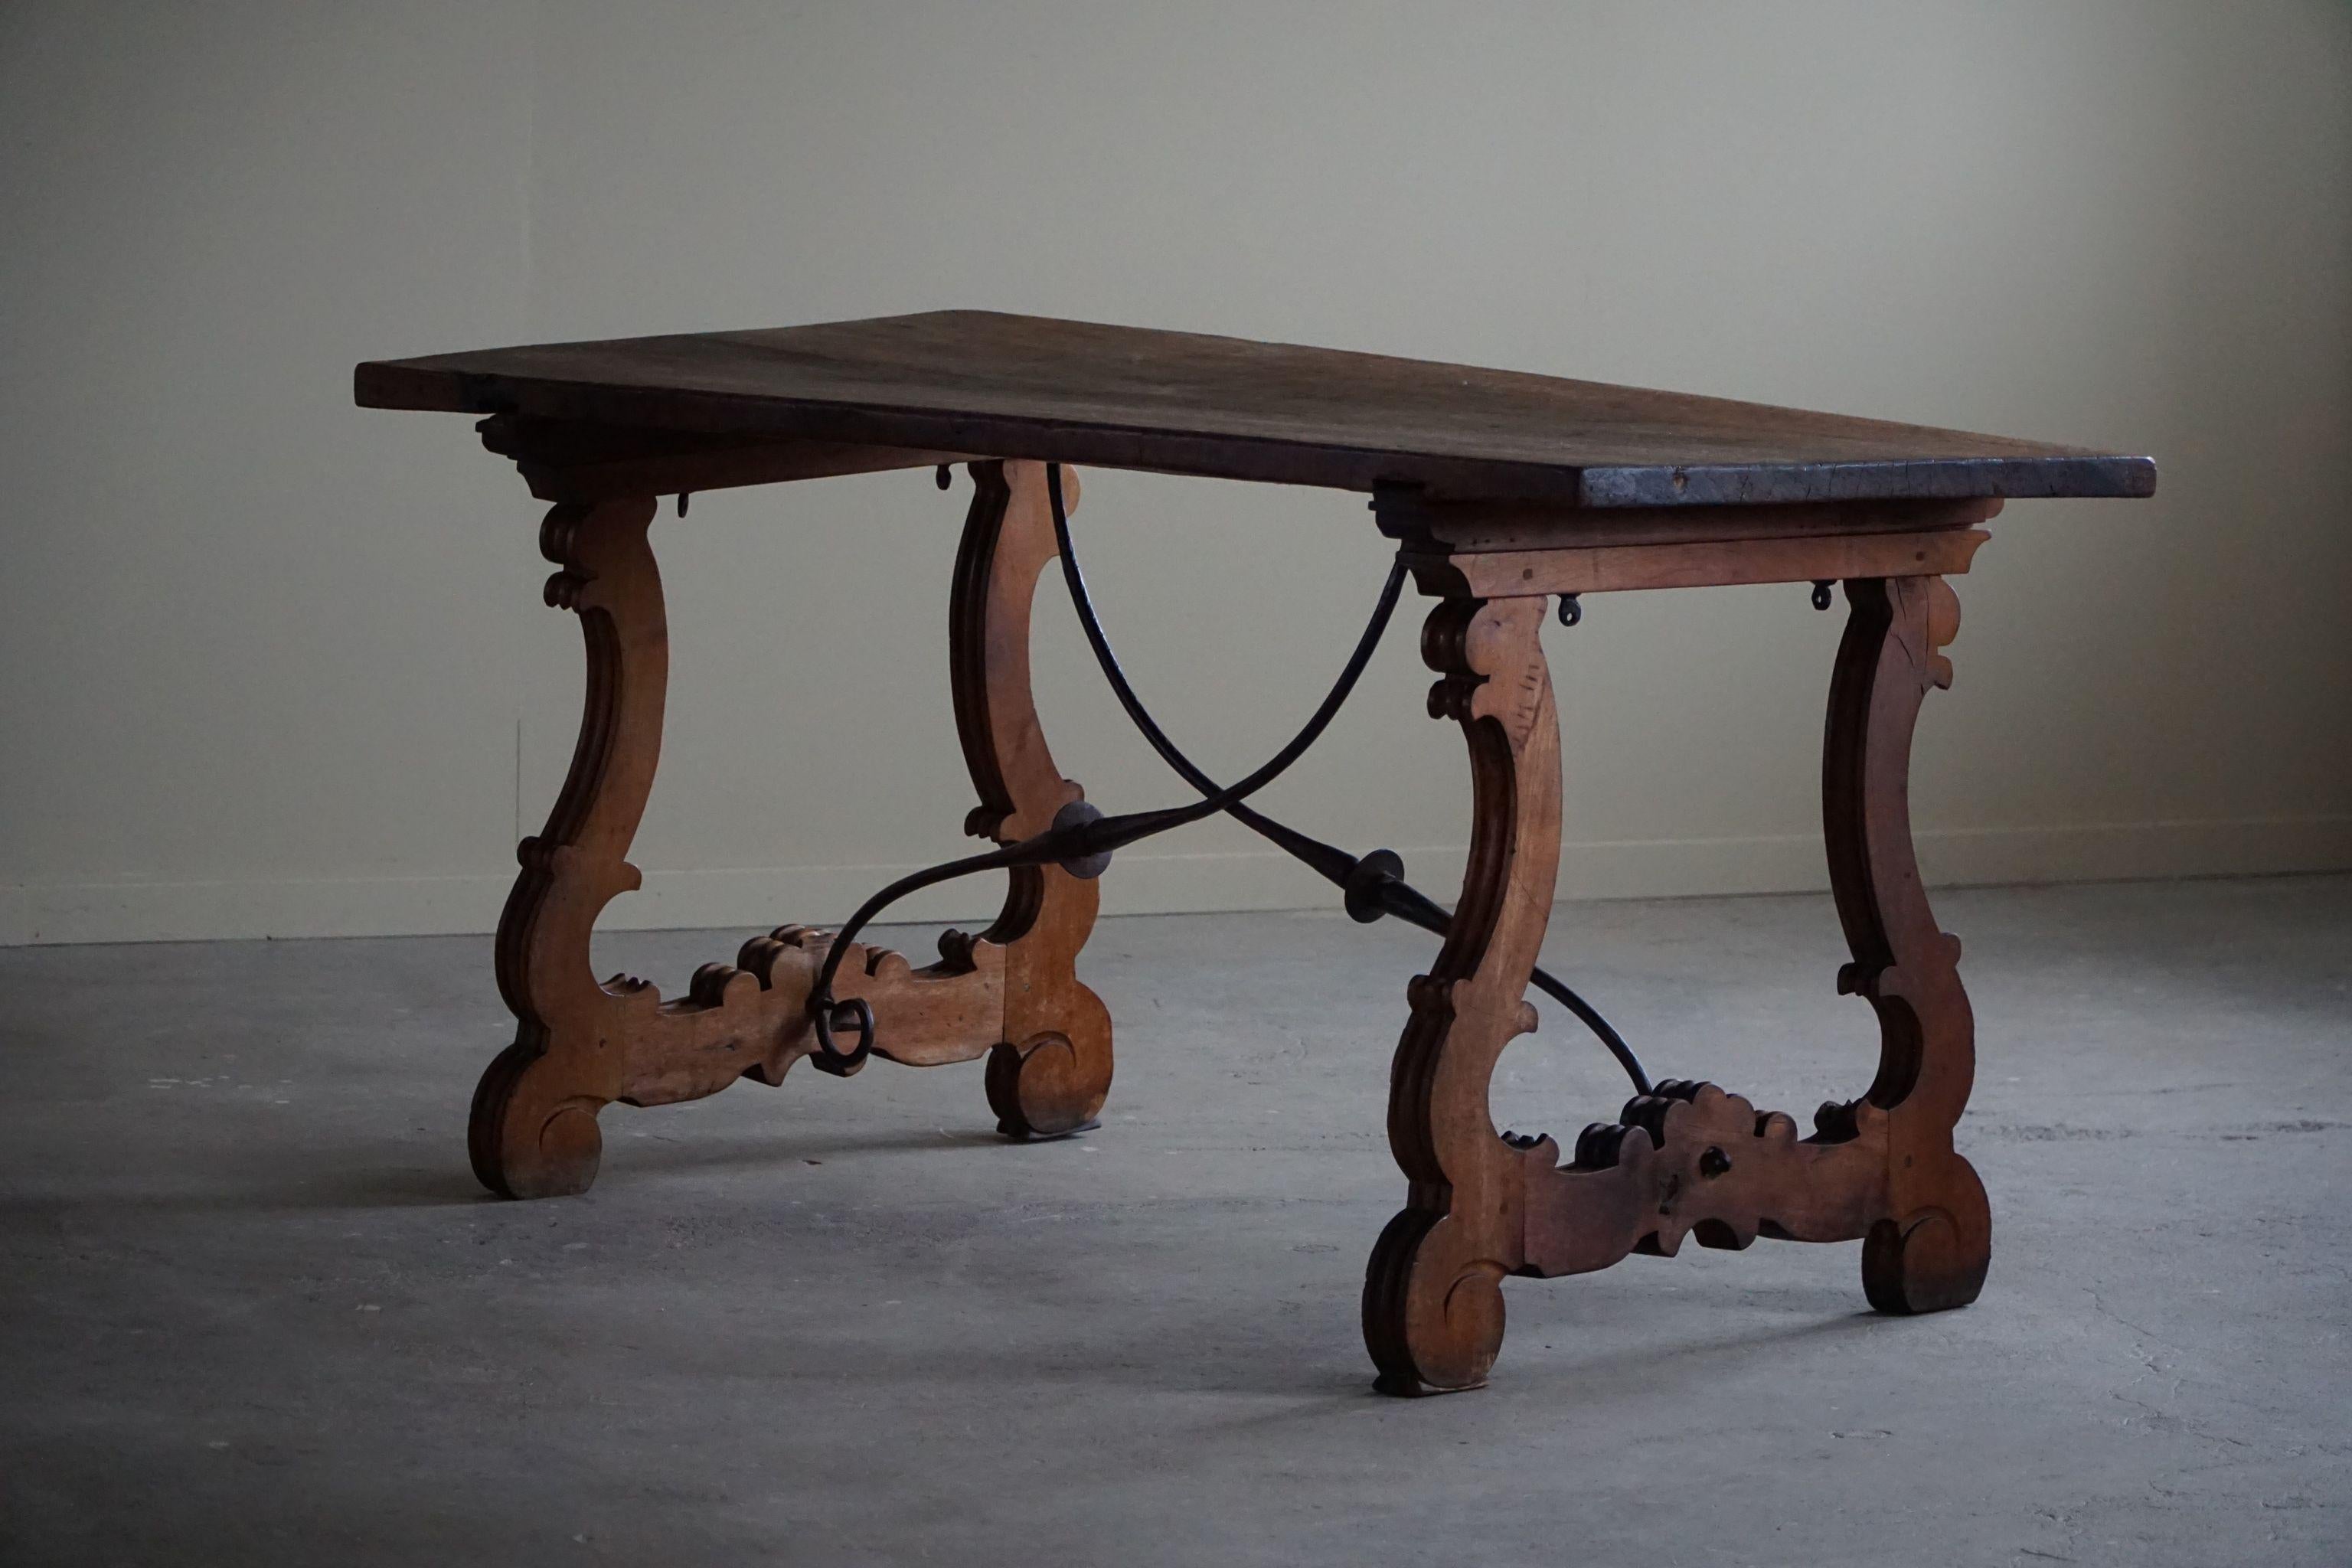 Hand-Crafted Antique Spanish Brutalist Table in Solid Oak & Wrought Iron, 19th Century For Sale